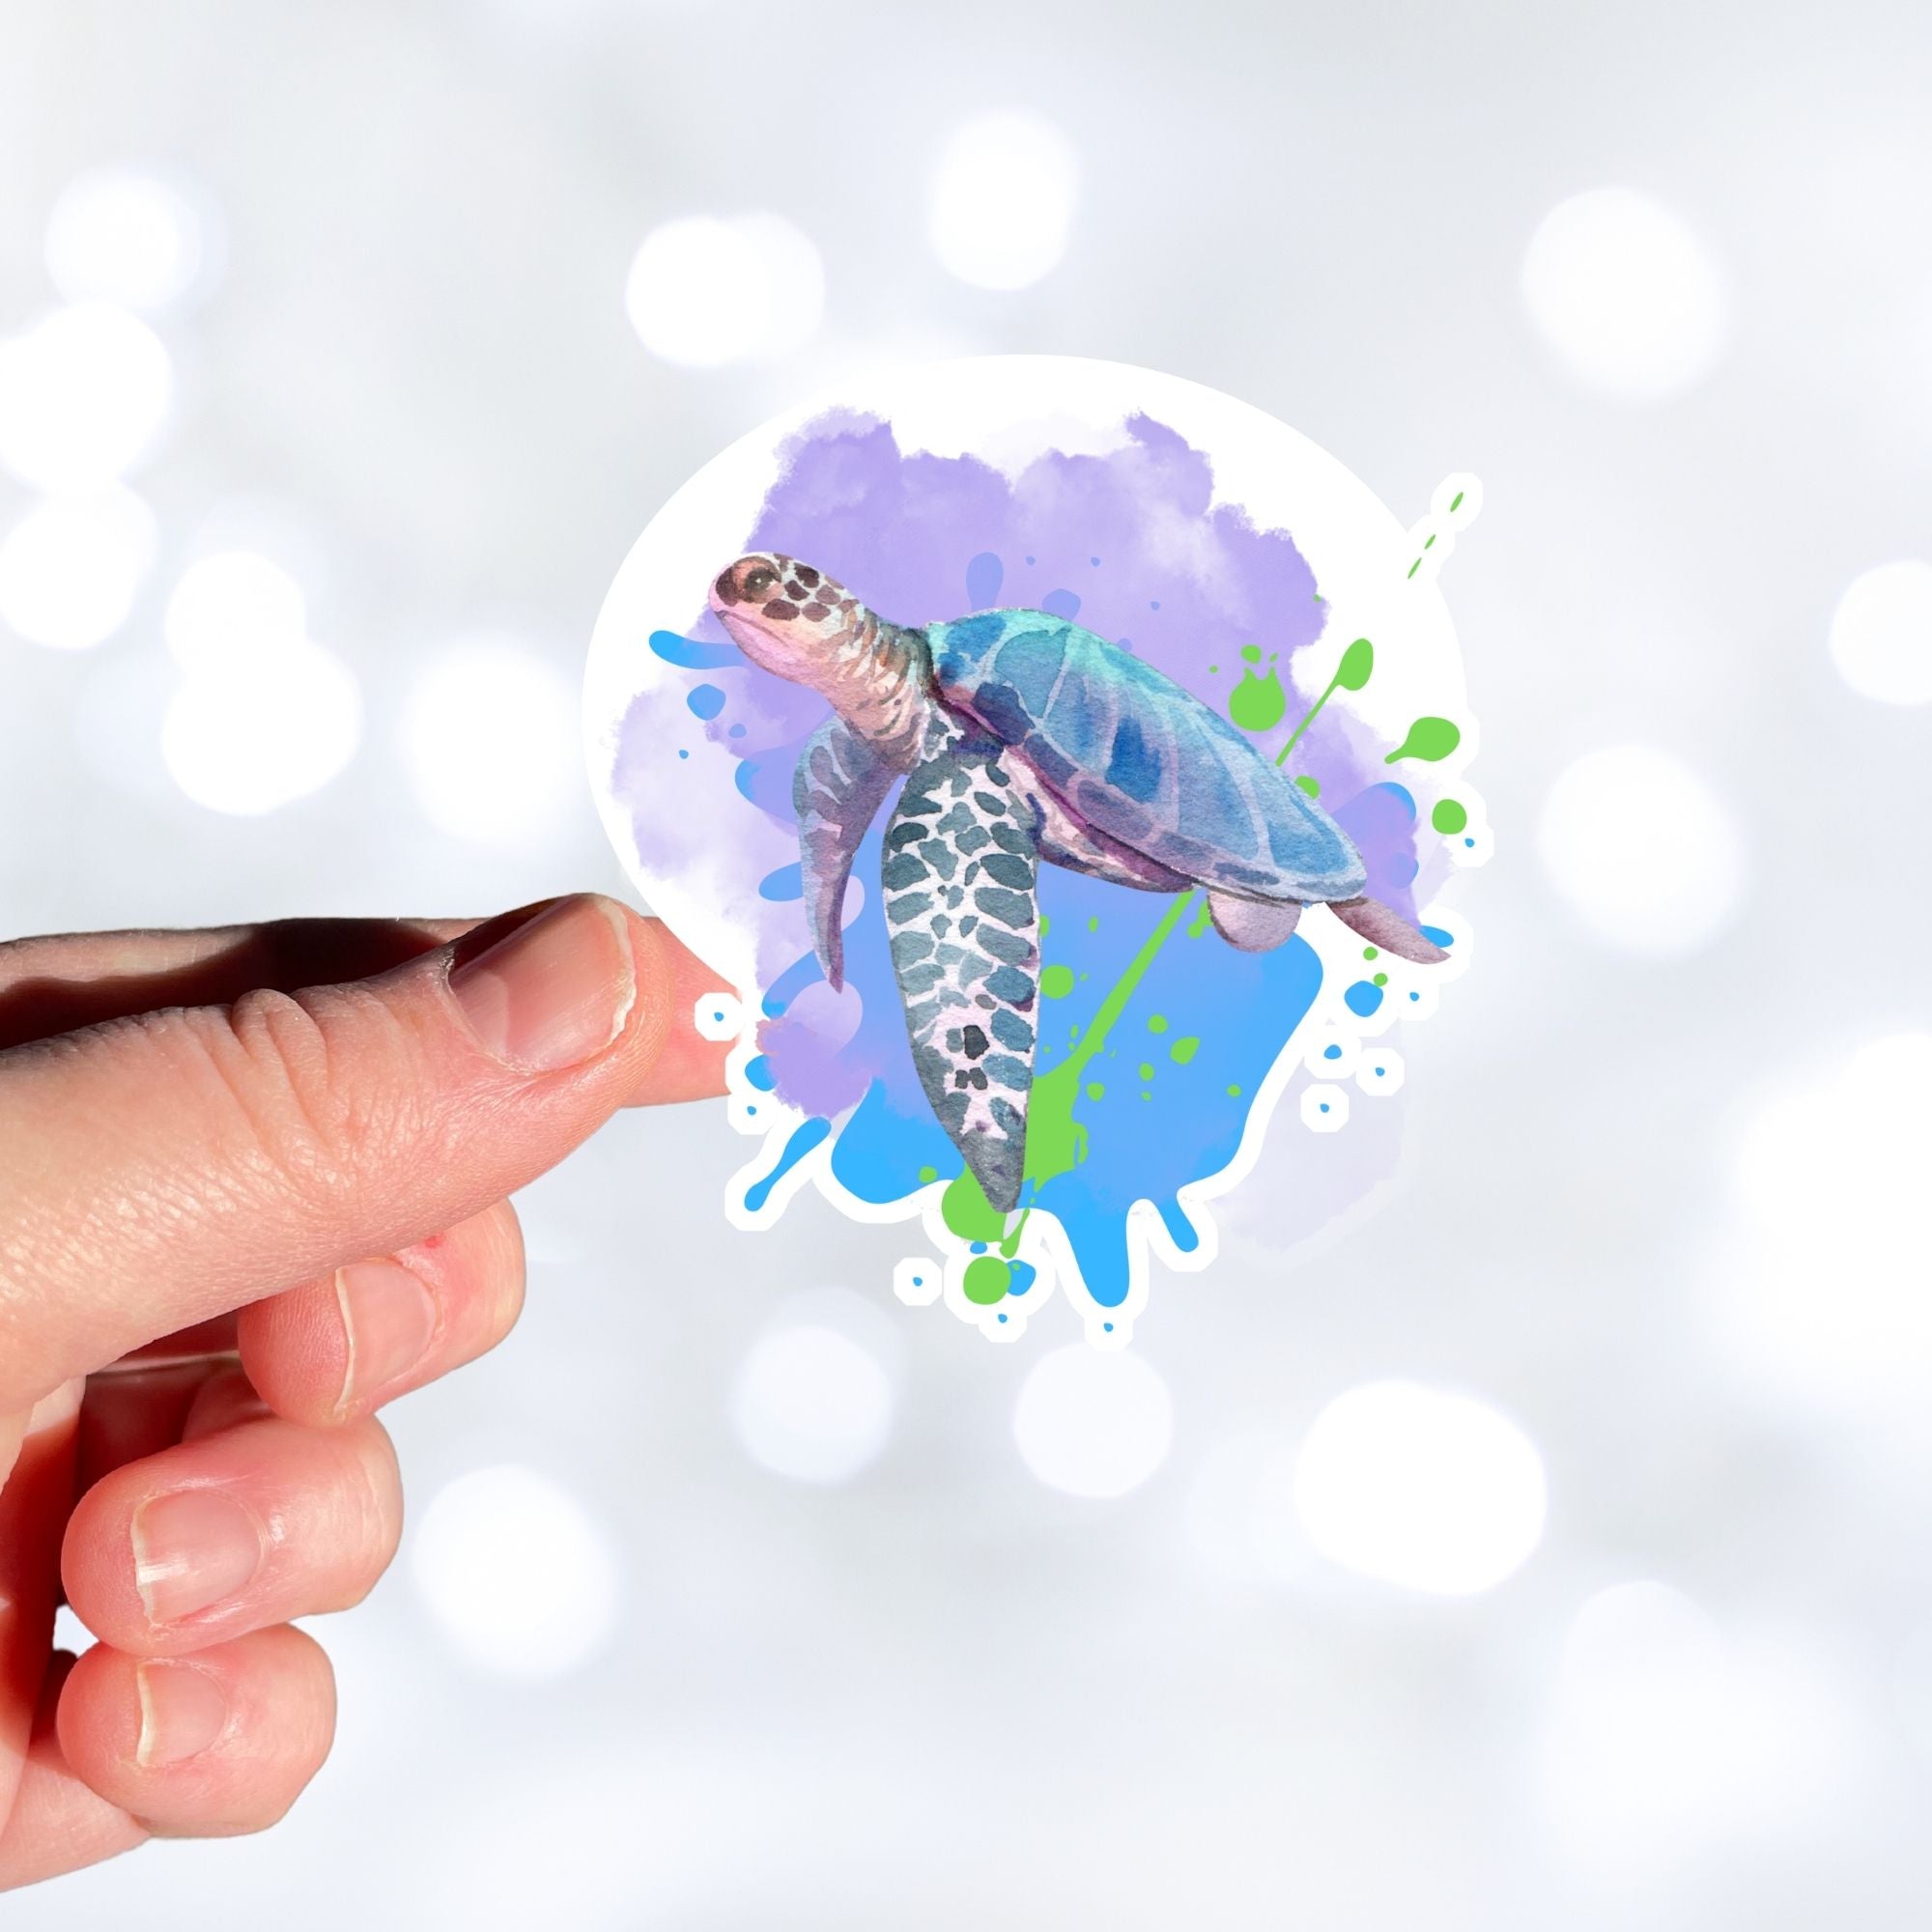 This individual die-cut sticker has a serene looking green sea turtle on a blue and purple background with splash of green. Just looking at this image is relaxing! This image shows a hand holding the Watercolor Sea Turtle sticker.